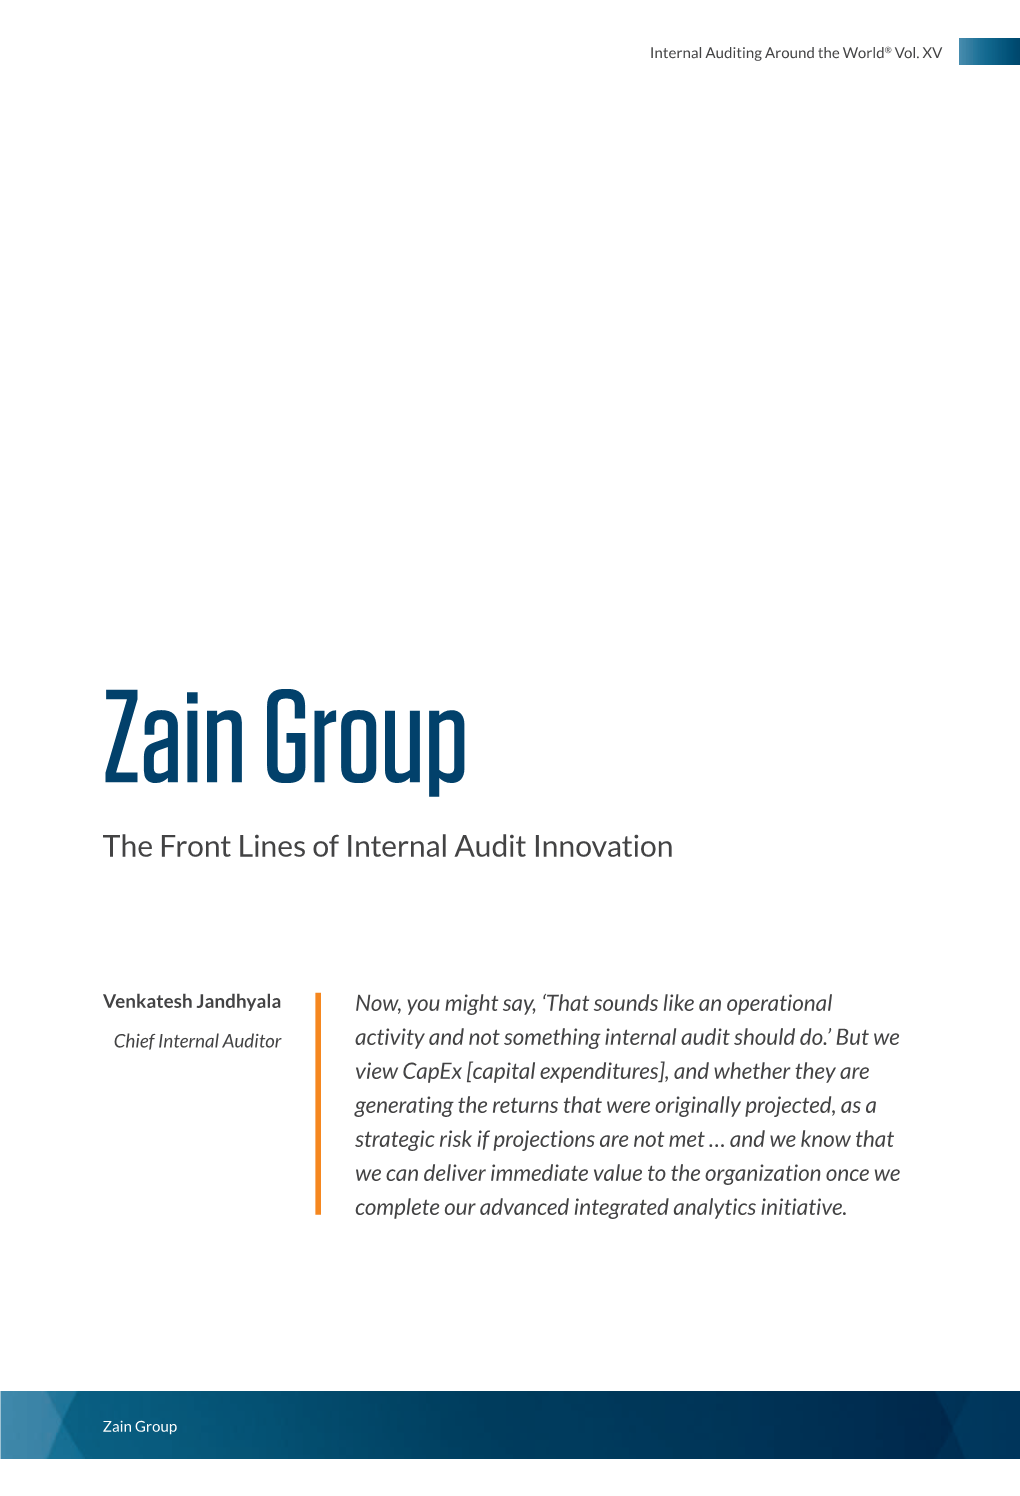 The Front Lines of Internal Audit Innovation